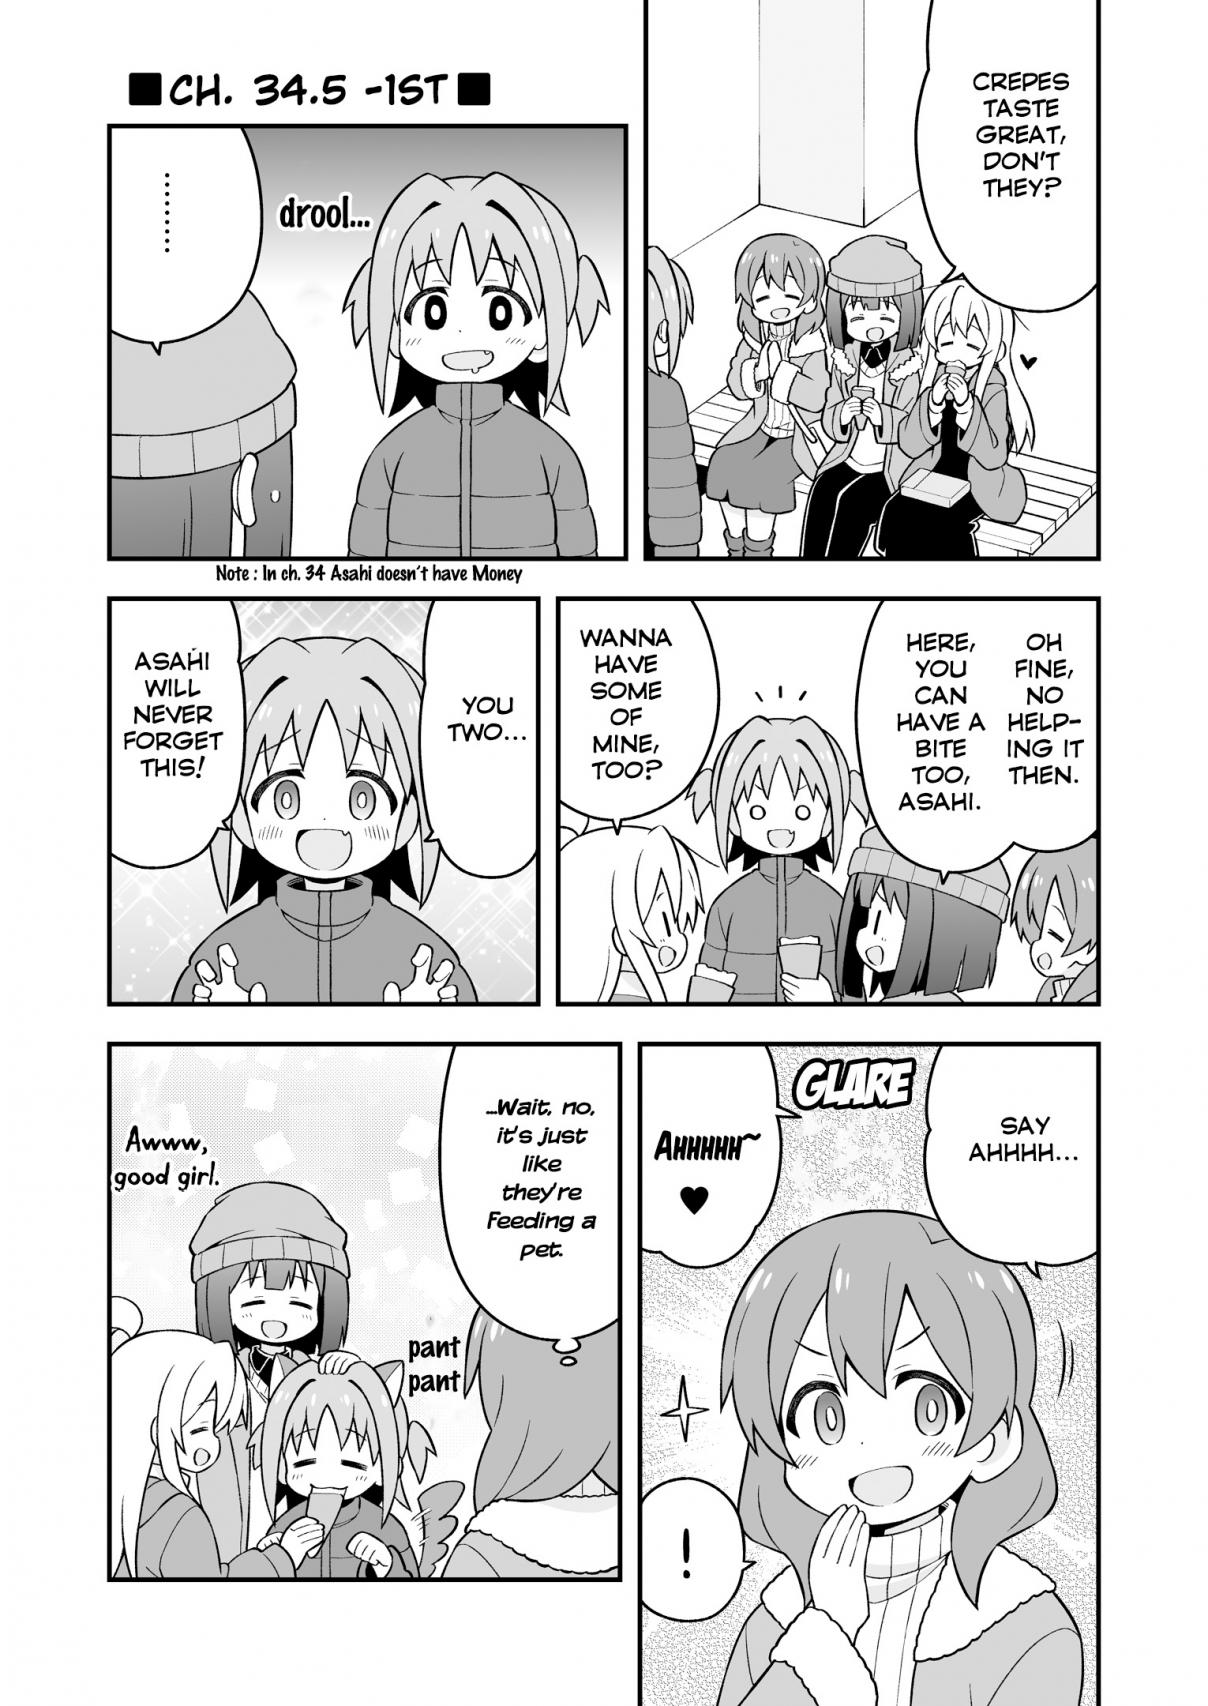 Onii chan is Done For! Vol. 4 Ch. 37.5 [TEMP 2]34.5 & 36.5 & Mini Extra (6 of 10)